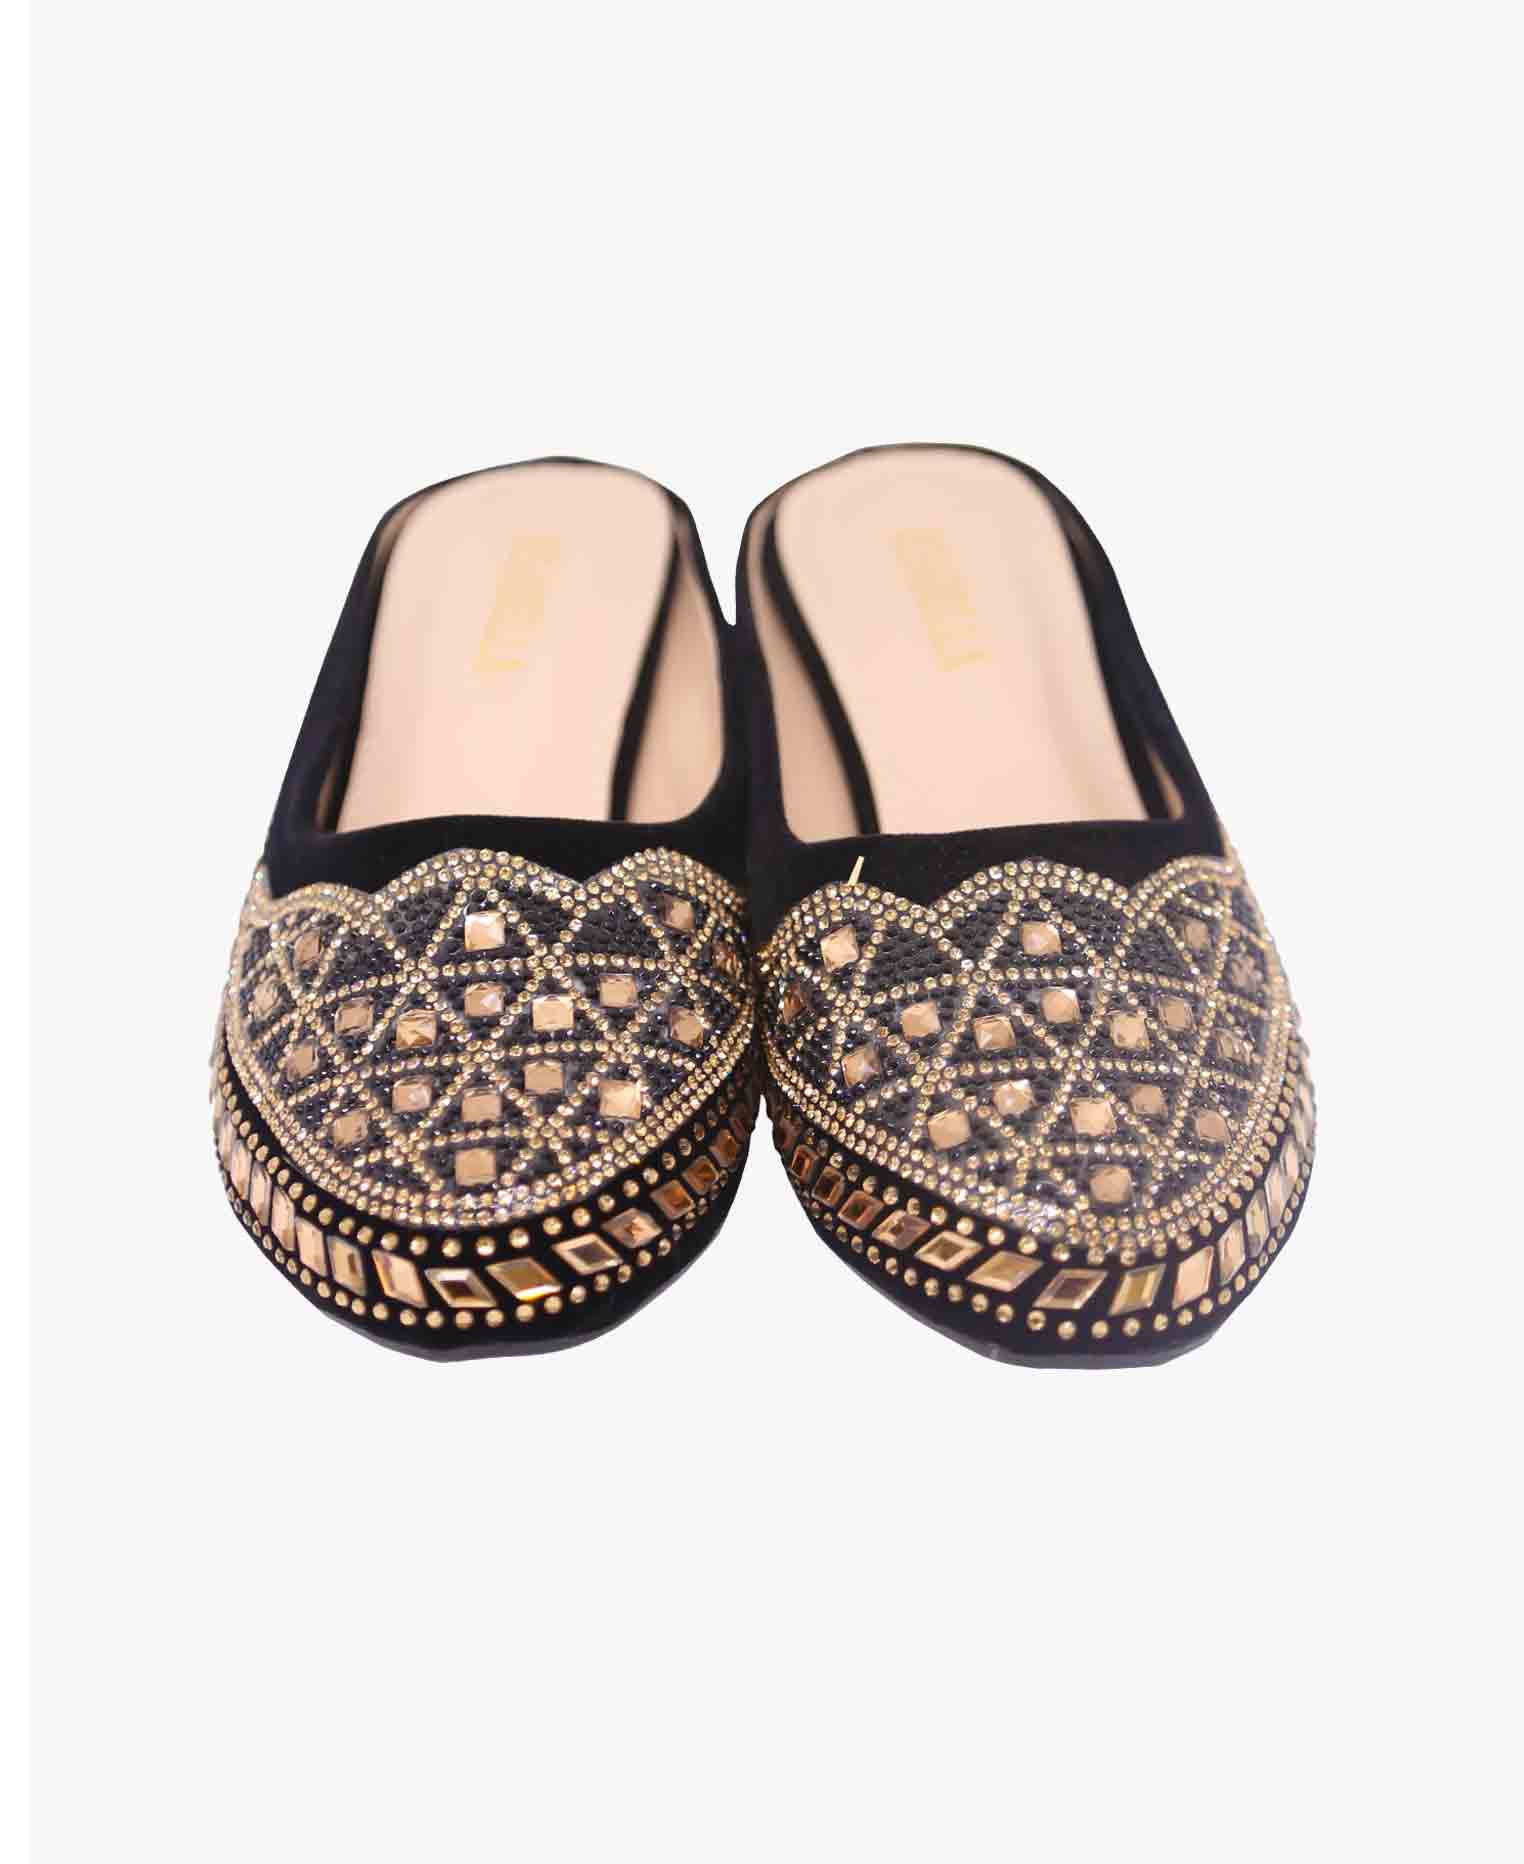 nagra shoes for ladies